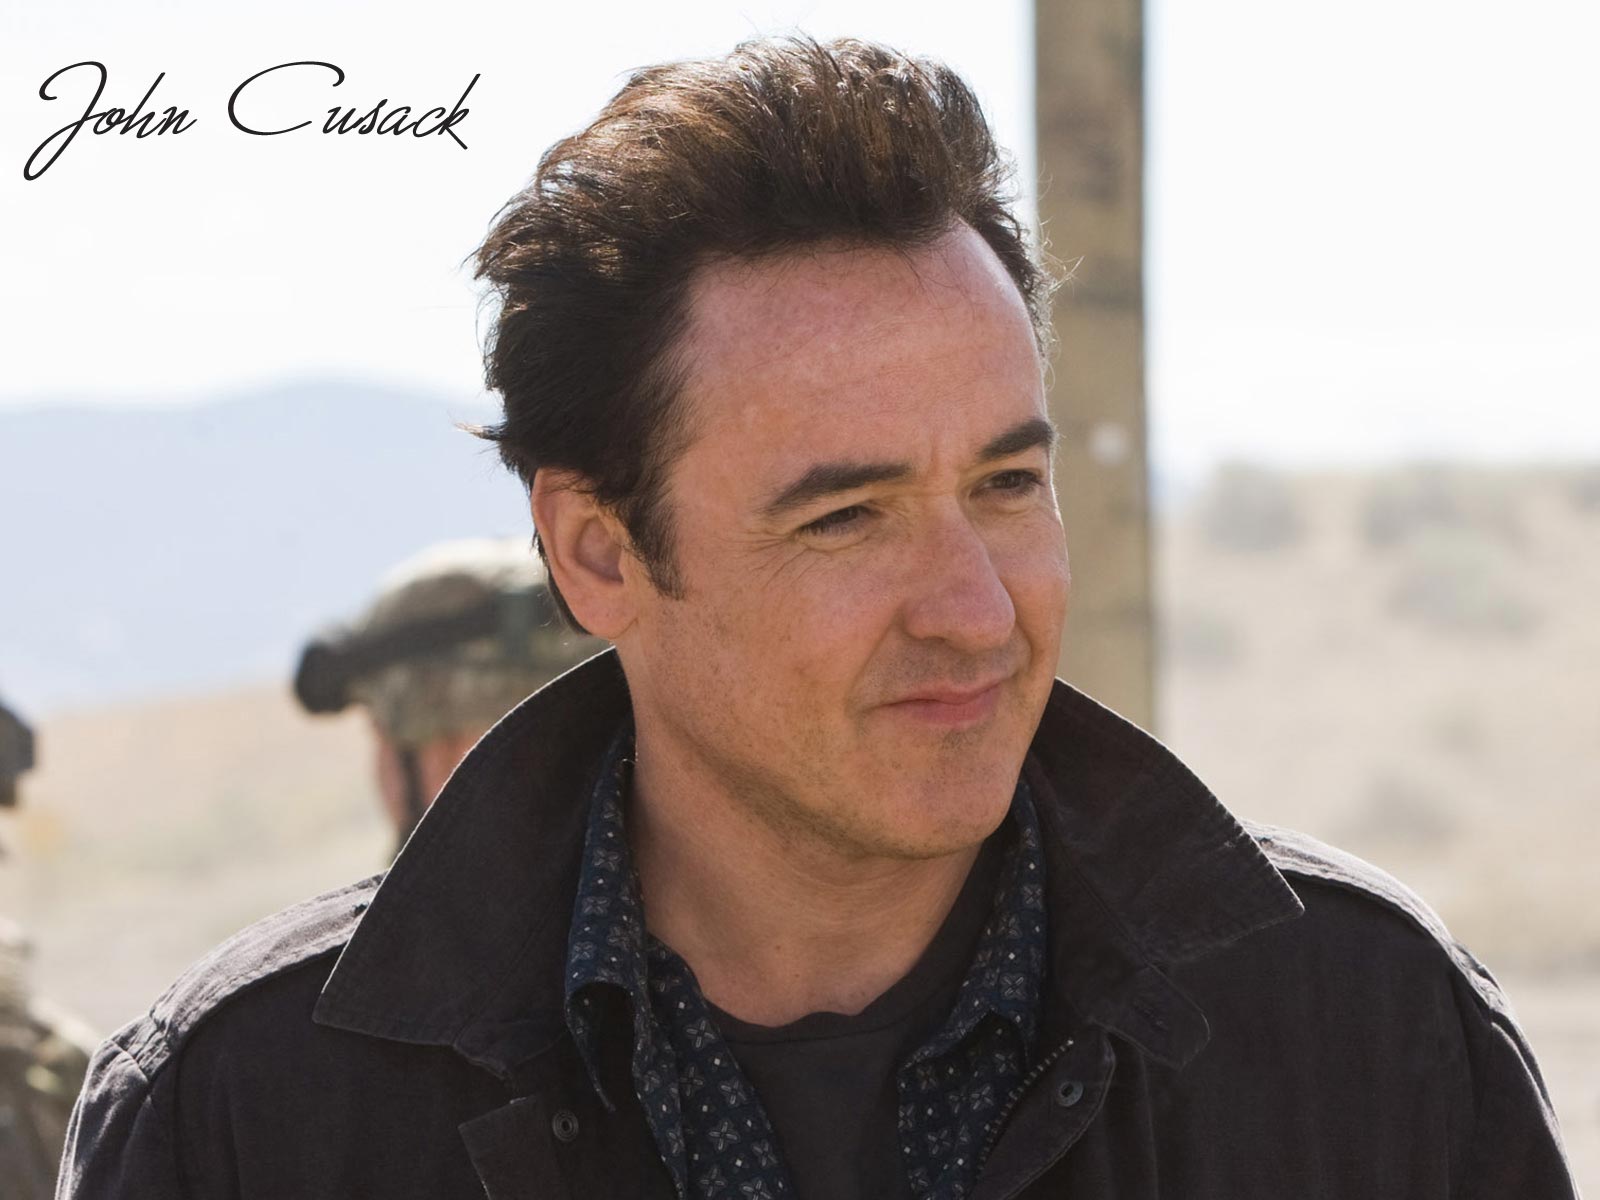 pictures-of-john-cusack